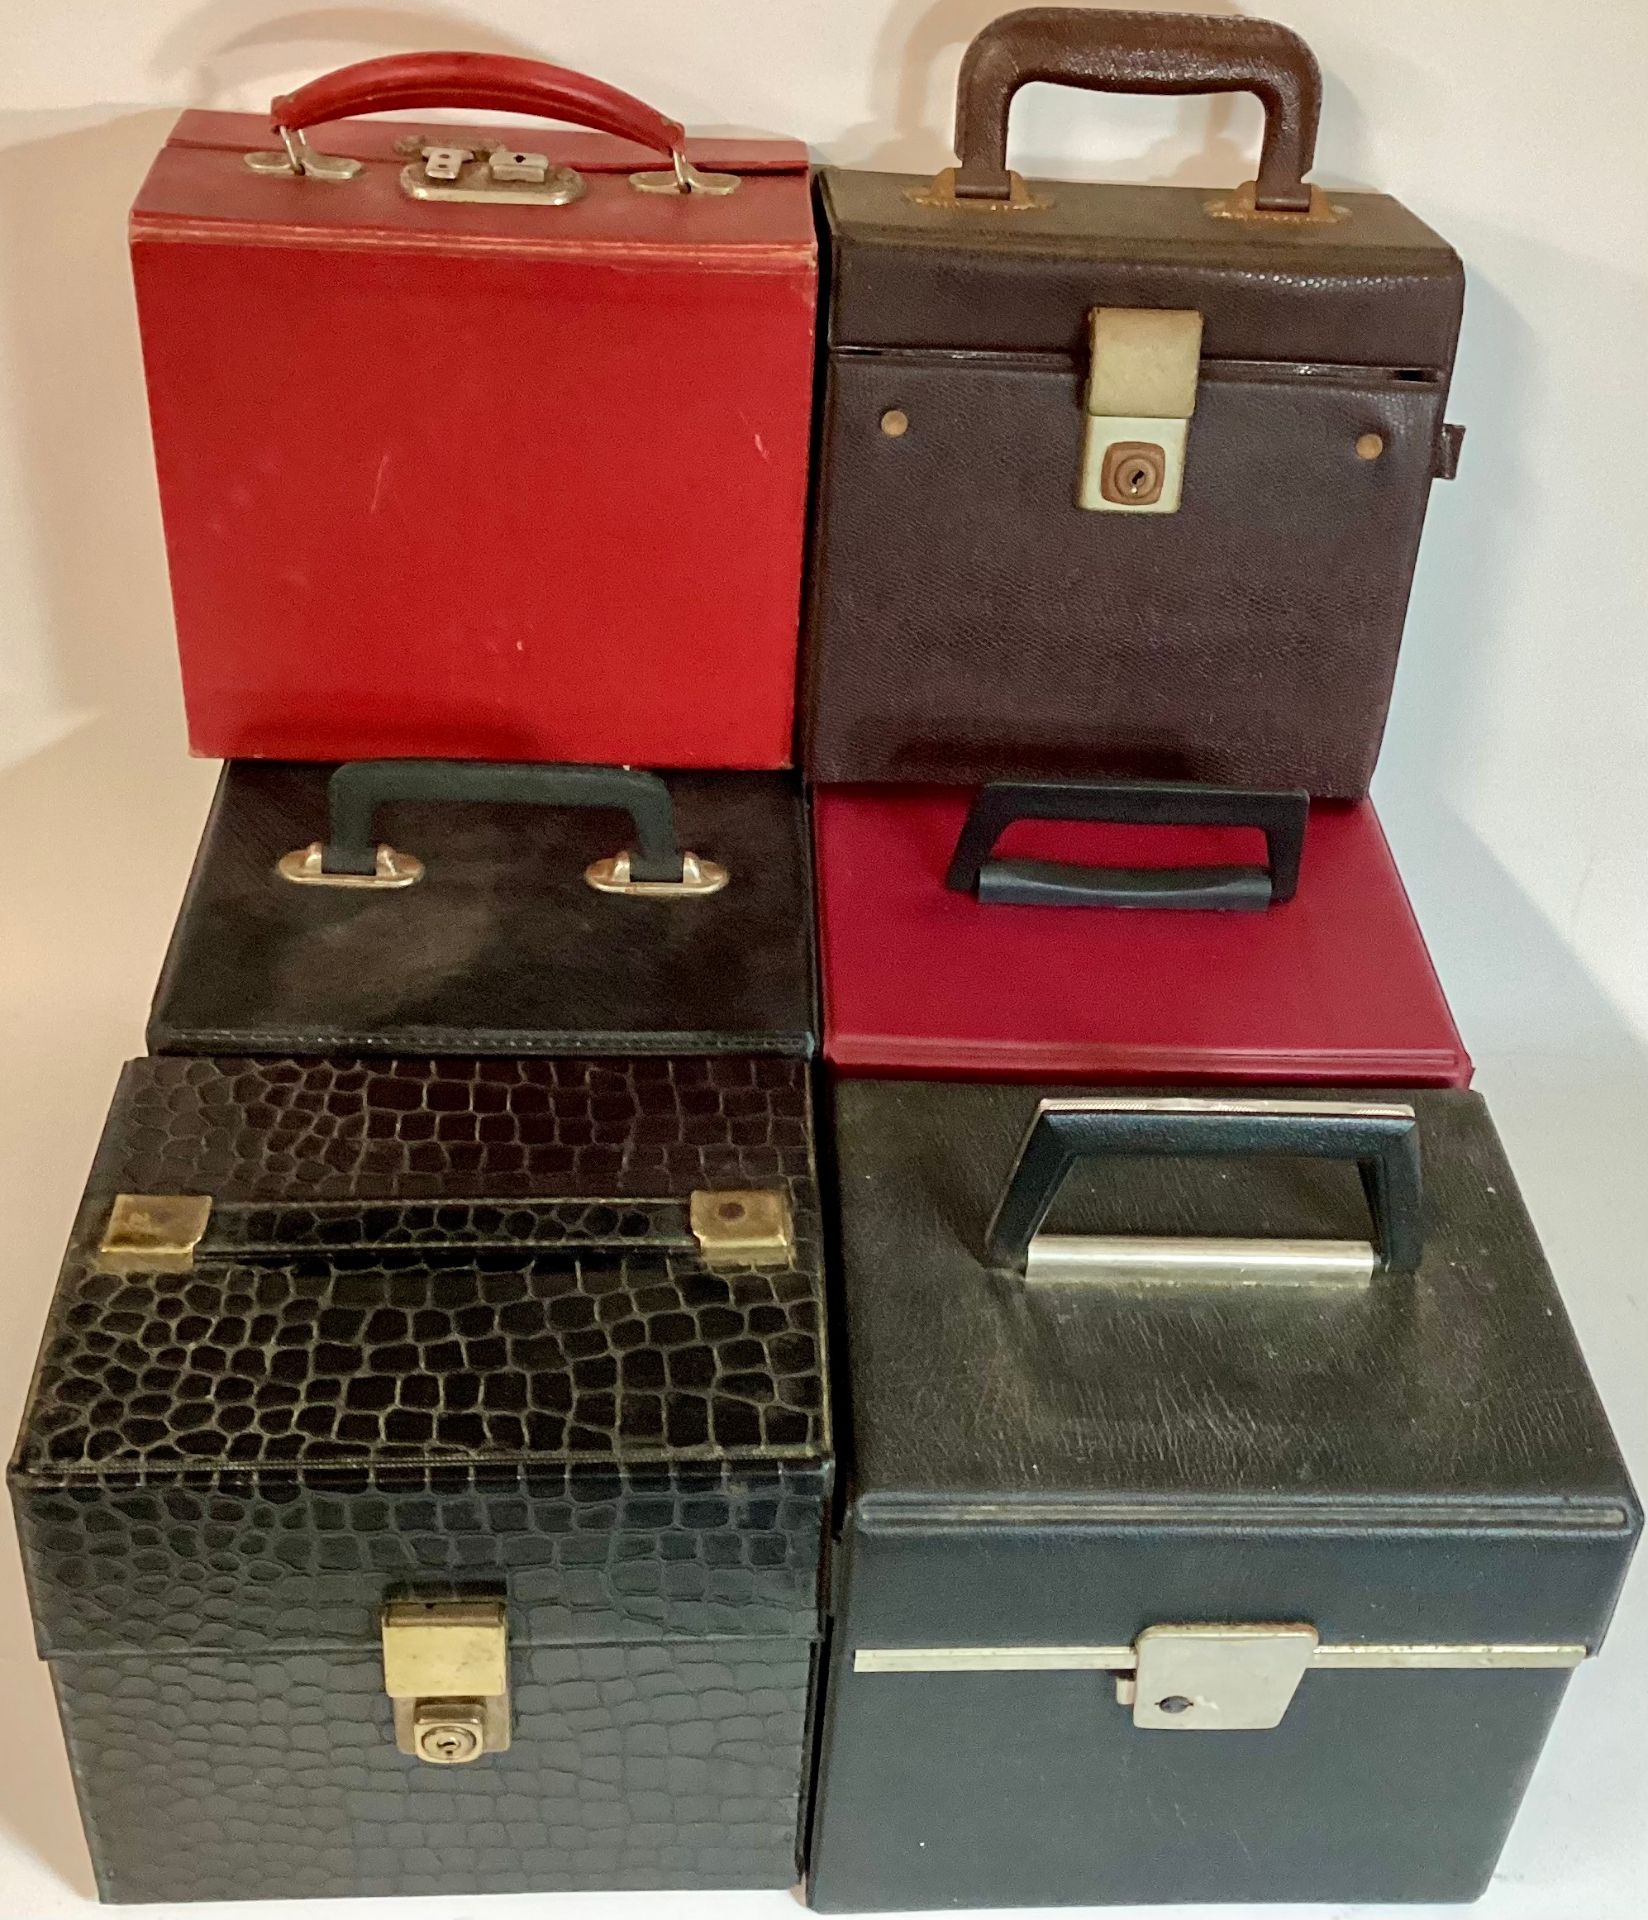 SINGLES CARRY CASES X 5. Nice set of five various 7” singles carry cases all found in VG conditions.